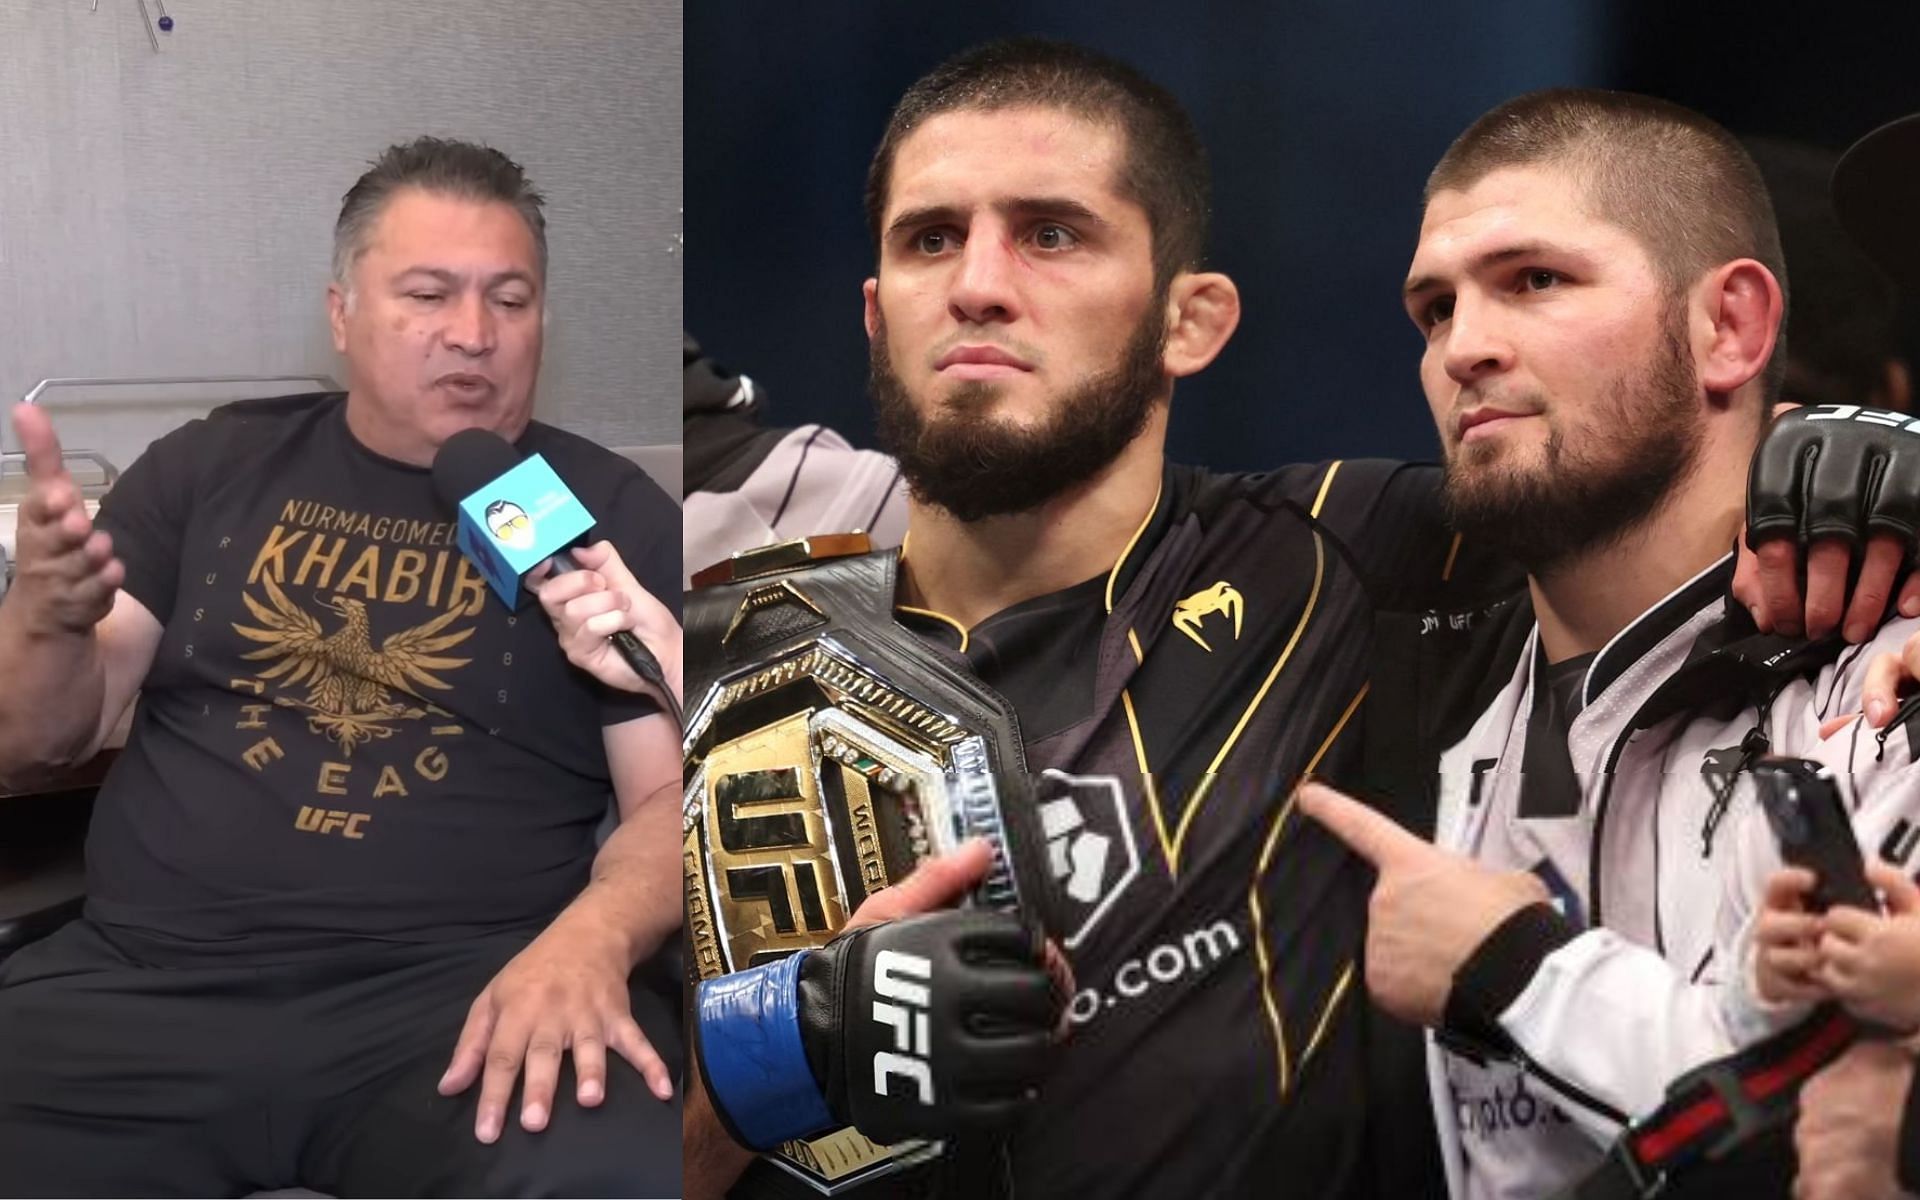 Javier Mendez (left) and Islam Makhachev and Khabib Nurmagomedov (right) [Images Courtesy: @theschmo on YouTube and @GettyImages]